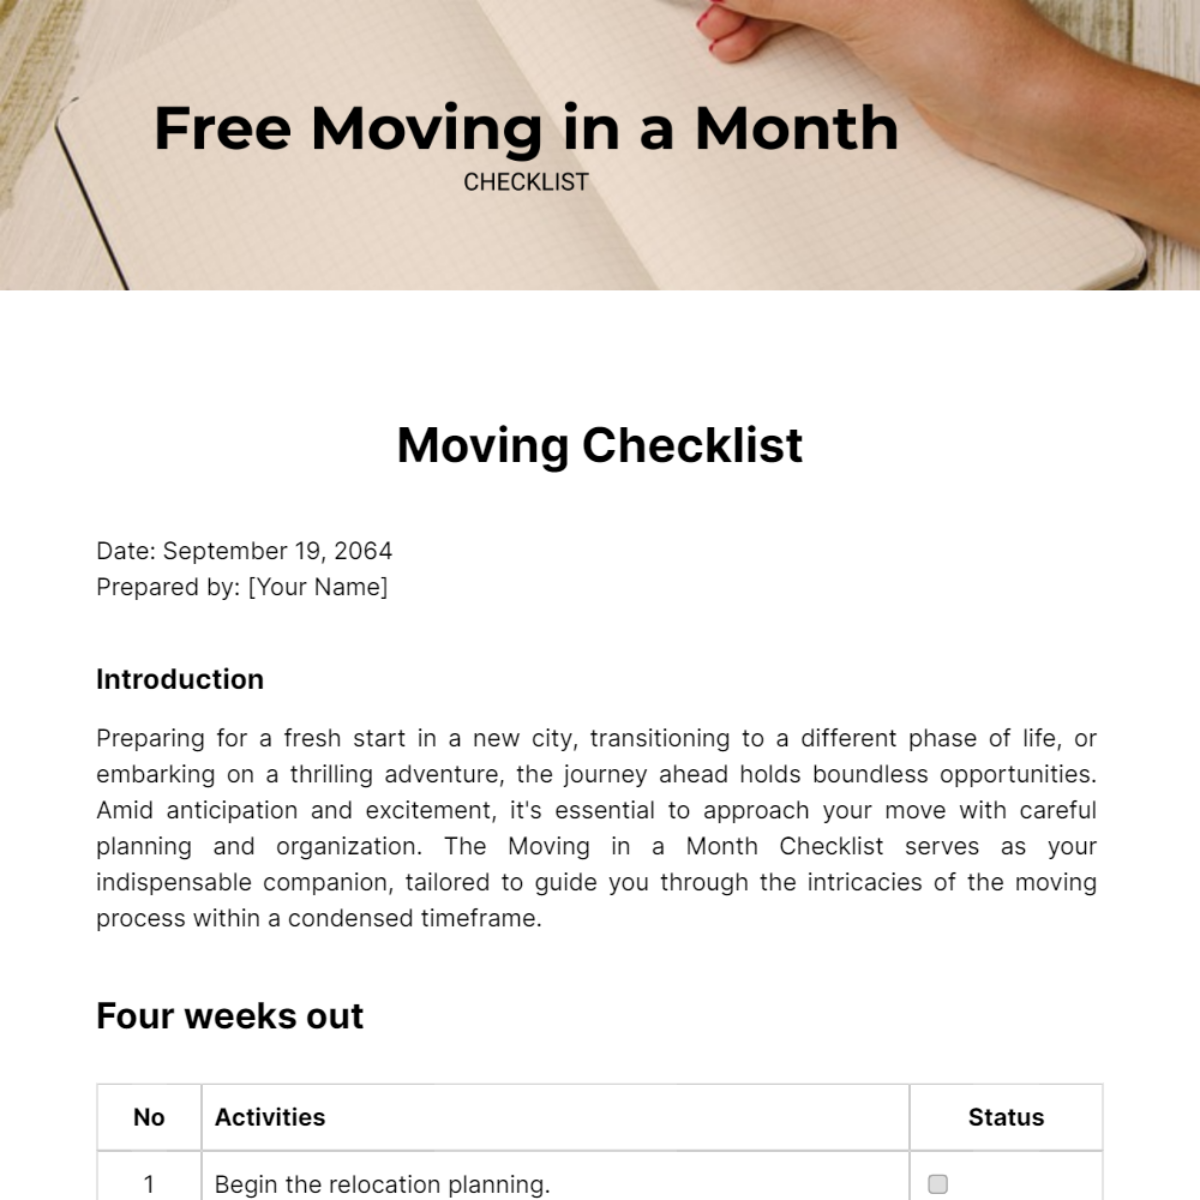 Moving in a Month Checklist Template